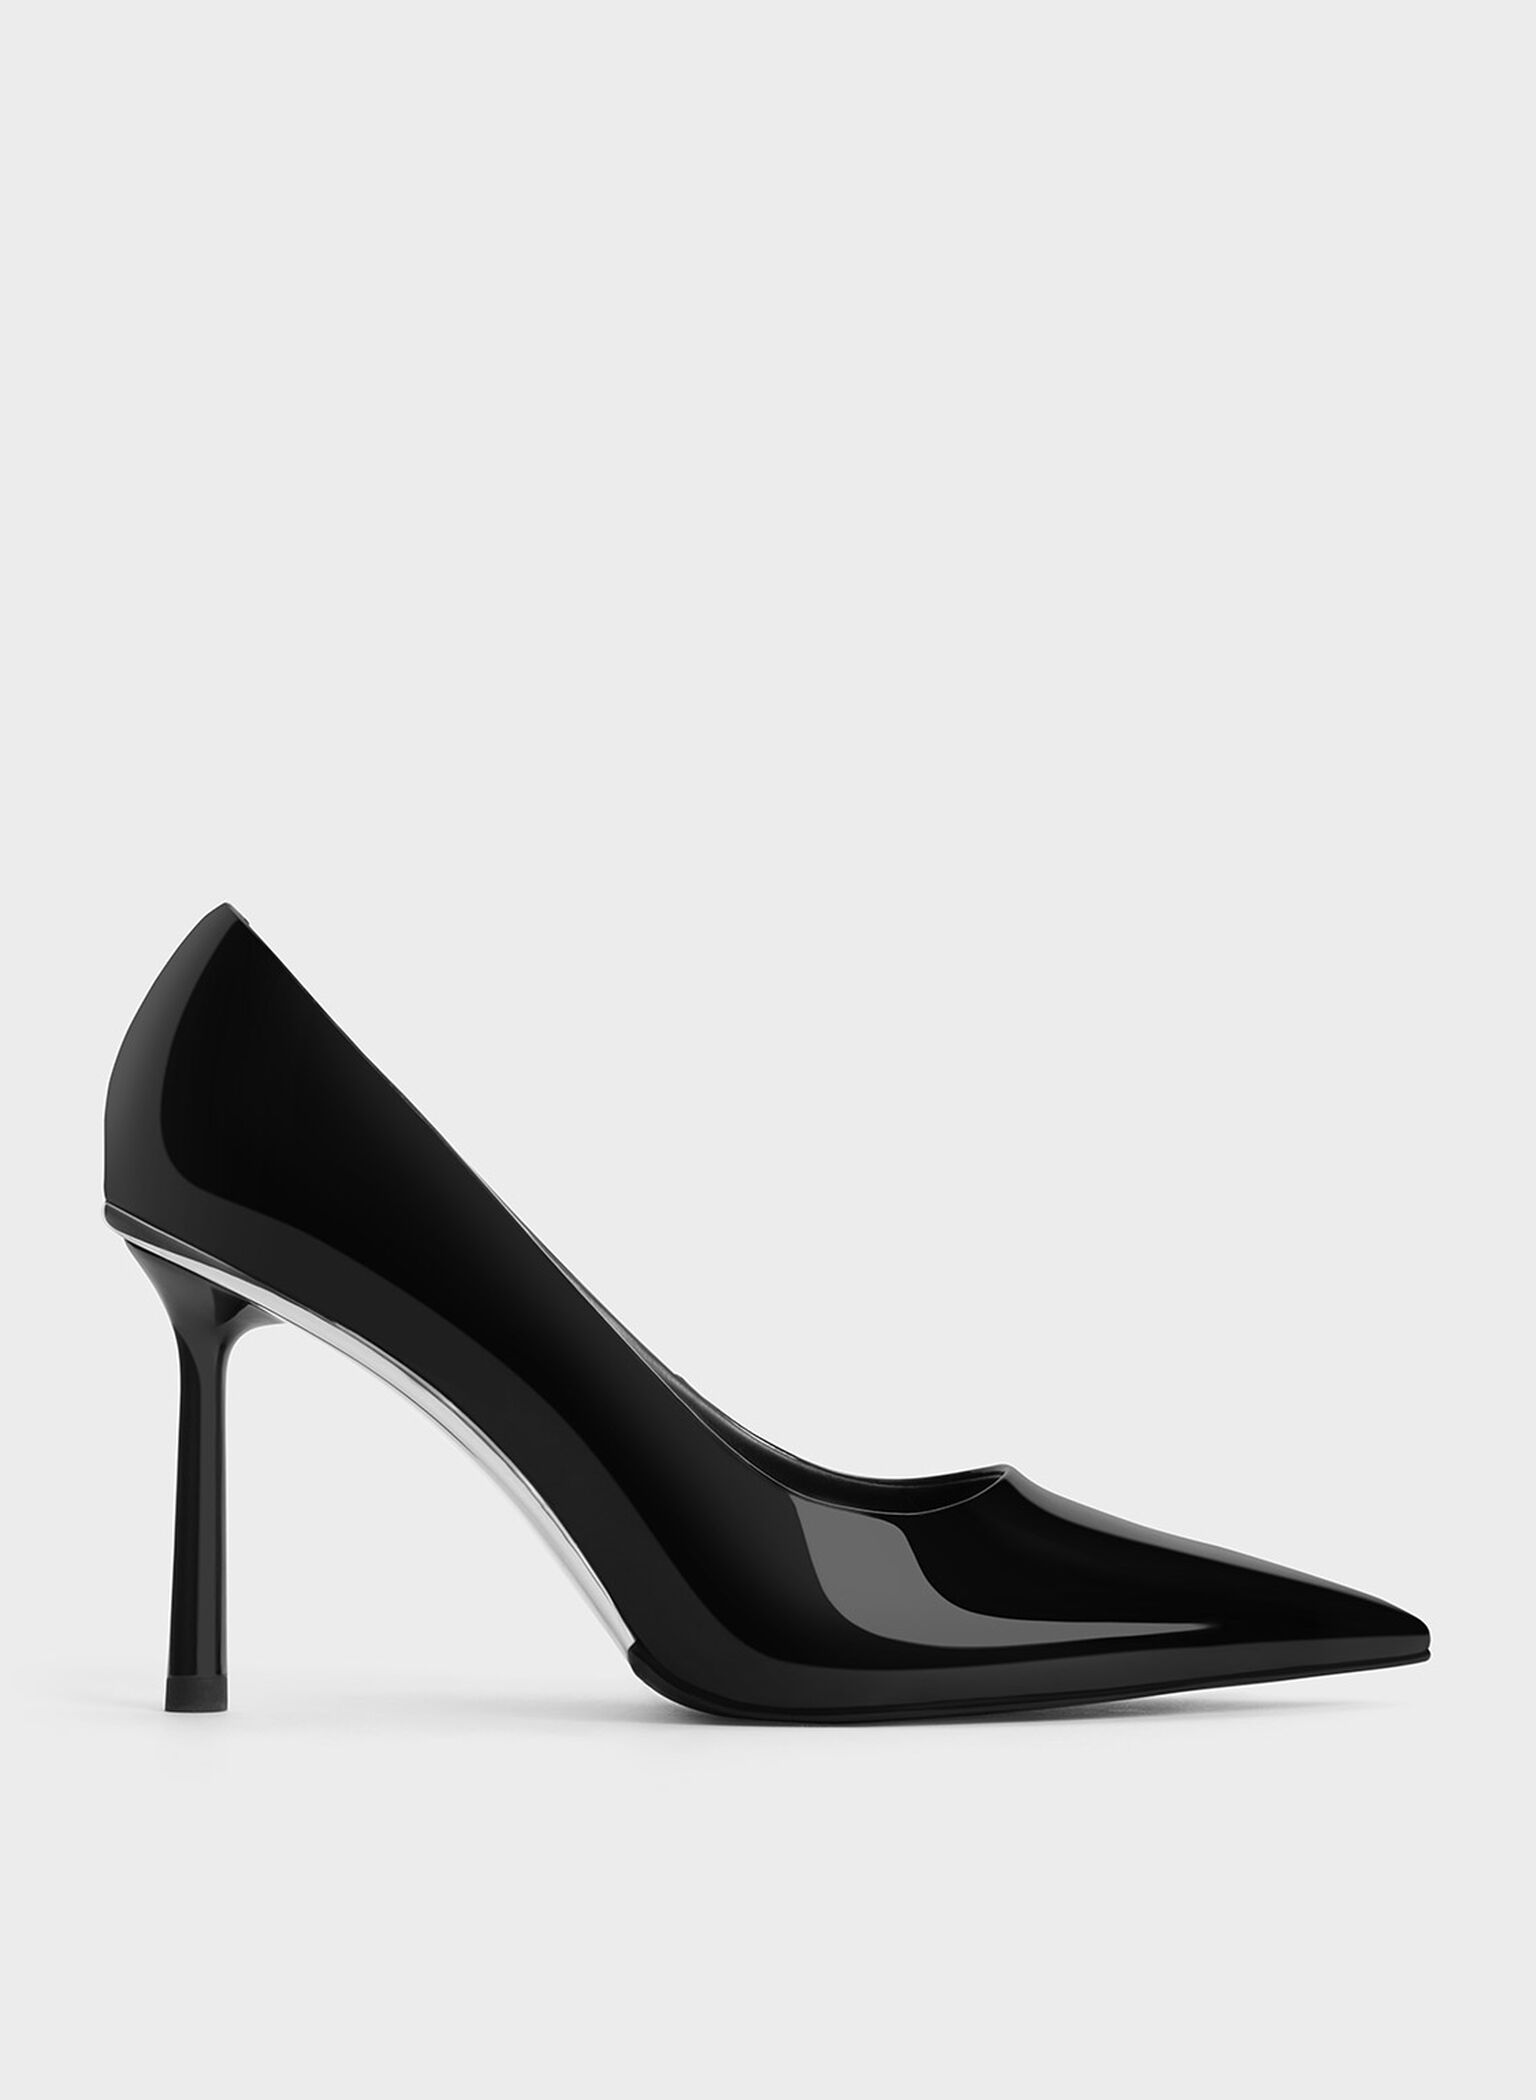 Black Patent Pointed-Toe Stiletto Heels - CHARLES & KEITH SG